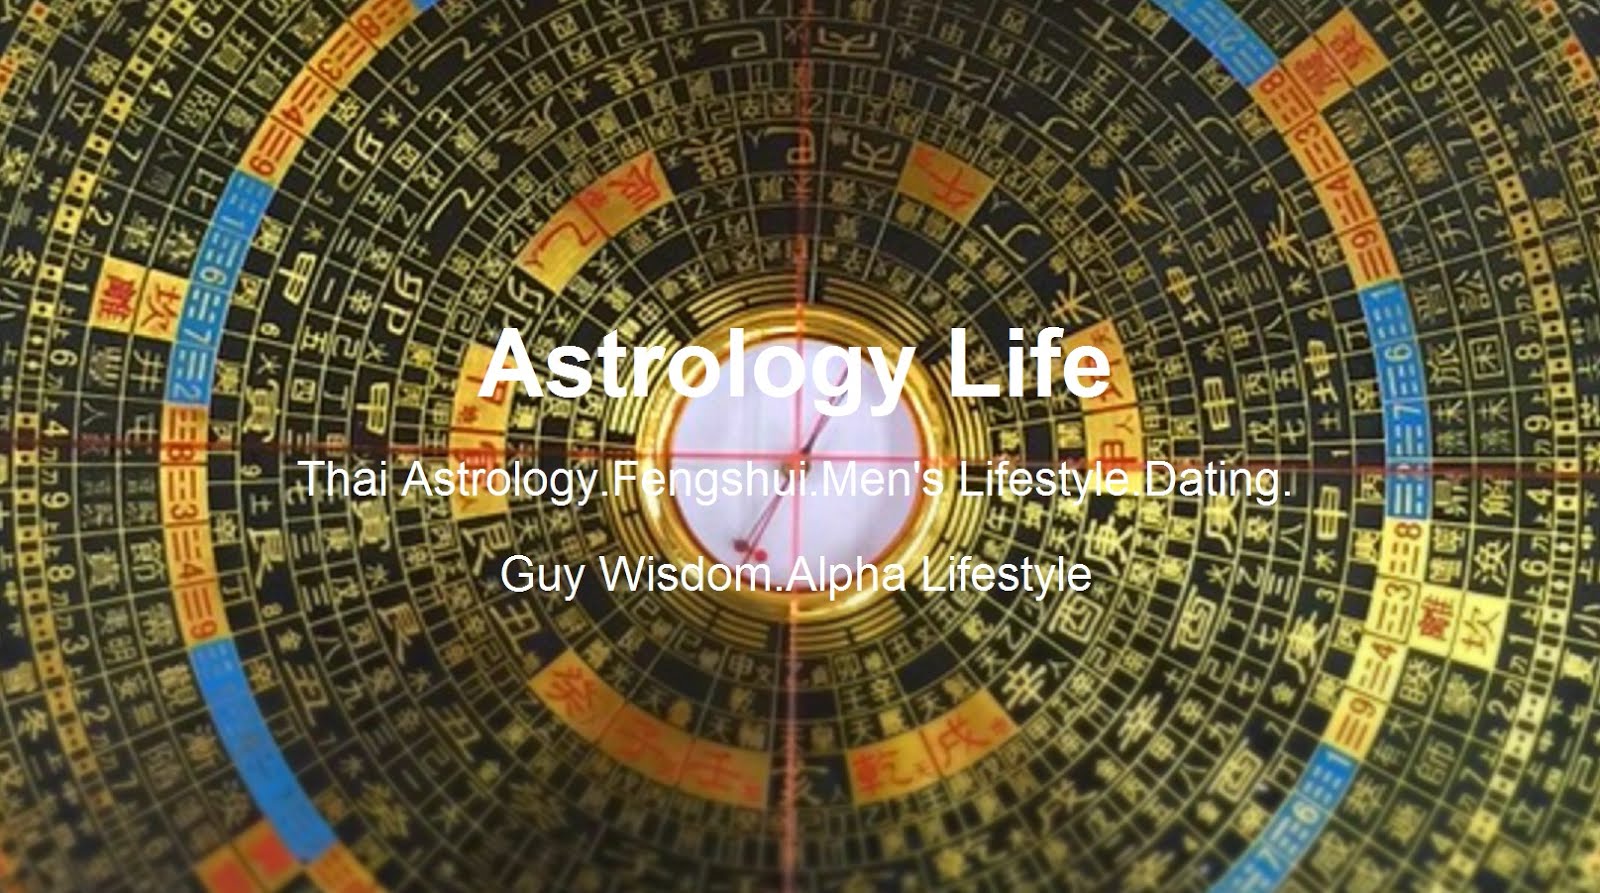 Astrology life Thai astrology and Fengshui